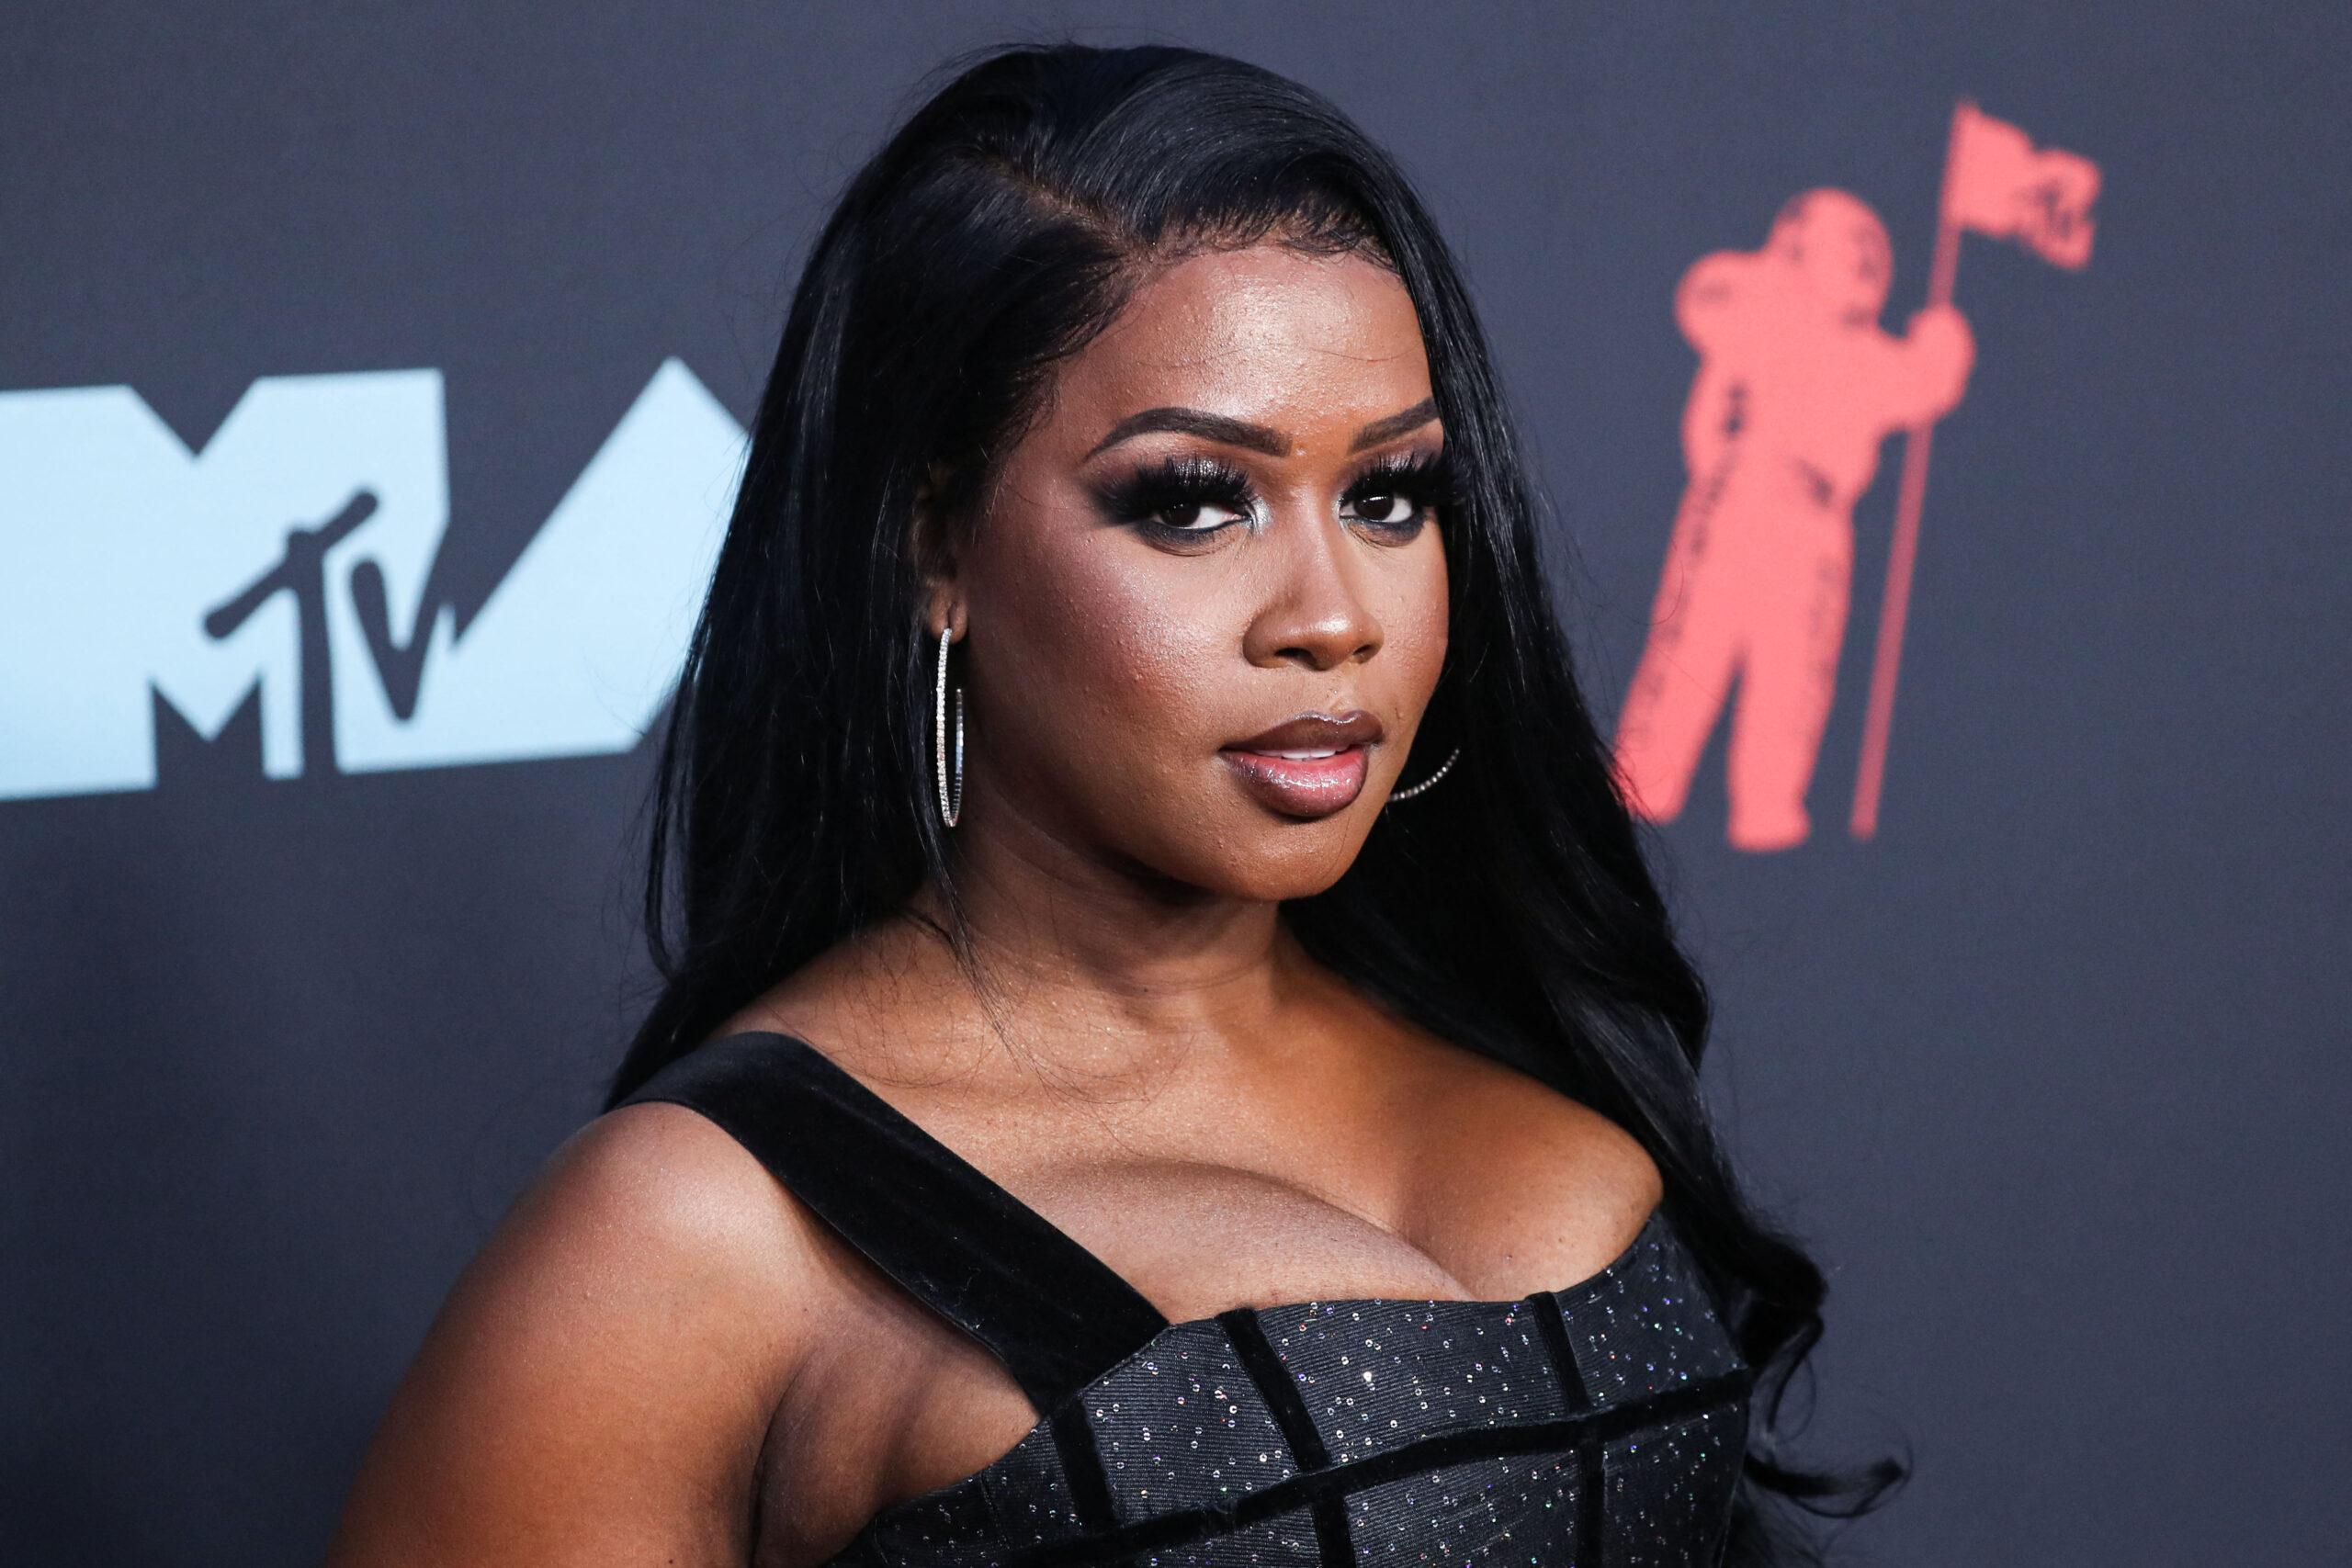 Remy Ma attends the 2019 MTV Video Music Awards